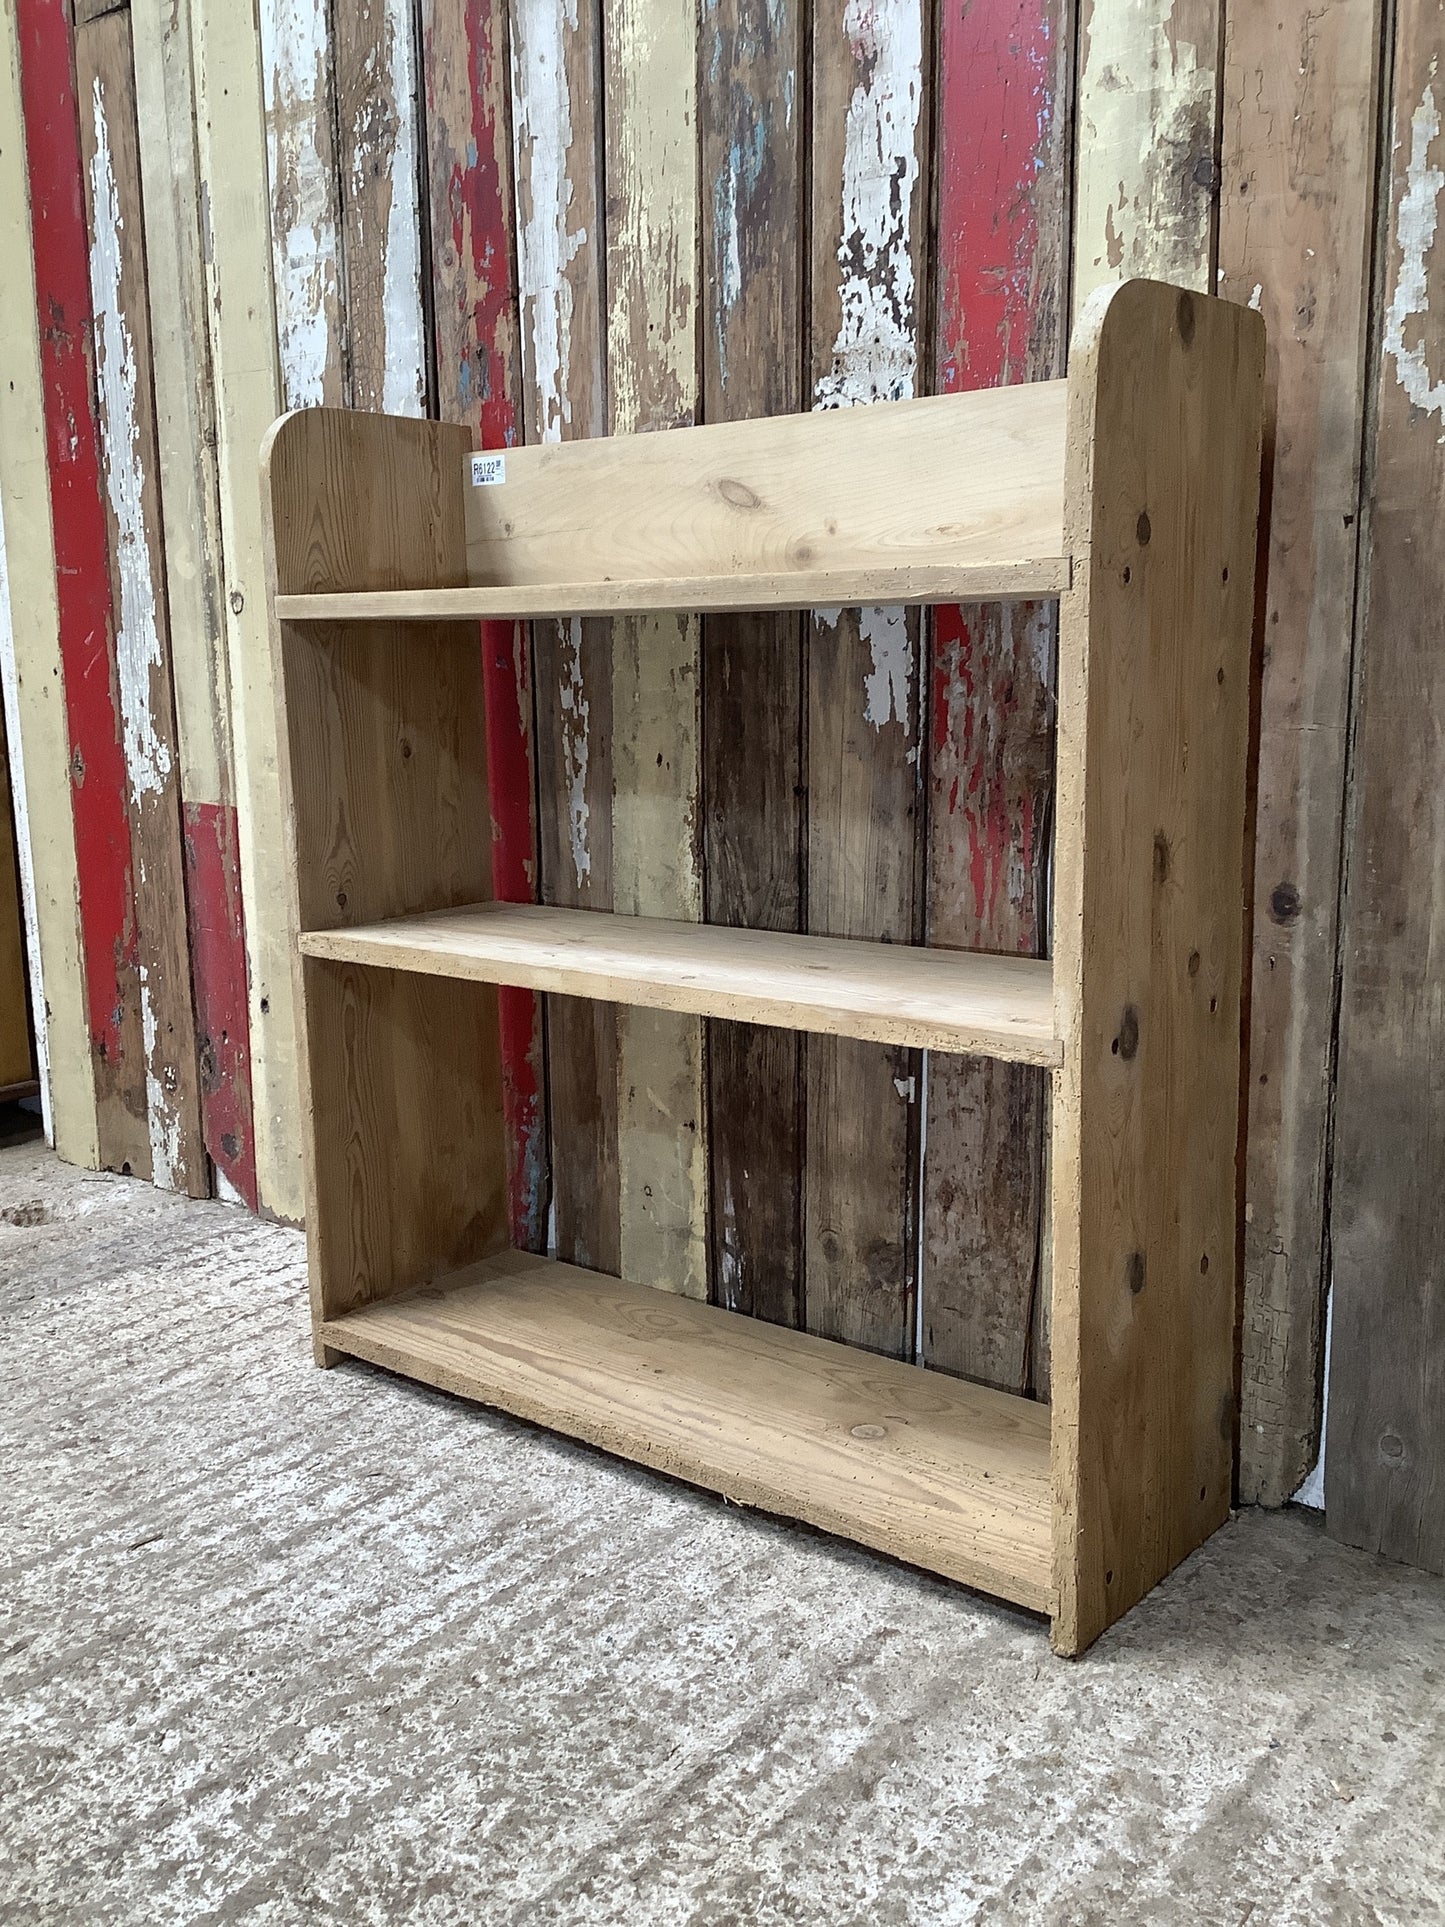 Old Rustic Stripped Pine Freestanding Wall Shelves 3 Shelves 2'9"H 2'6" W